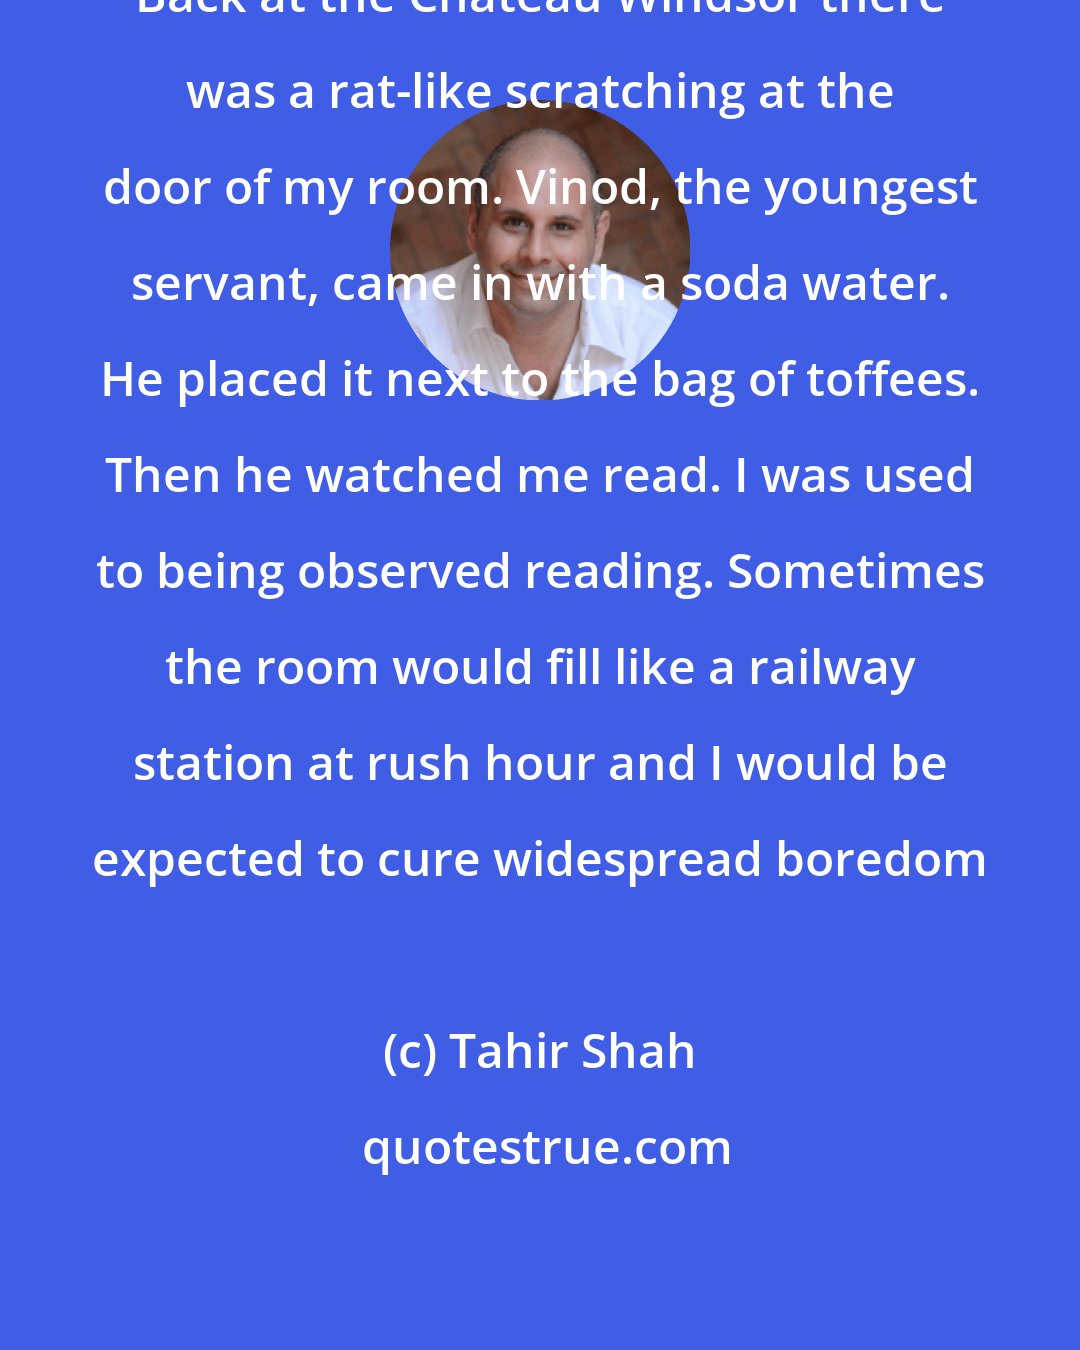 Tahir Shah: Back at the Chateau Windsor there was a rat-like scratching at the door of my room. Vinod, the youngest servant, came in with a soda water. He placed it next to the bag of toffees. Then he watched me read. I was used to being observed reading. Sometimes the room would fill like a railway station at rush hour and I would be expected to cure widespread boredom